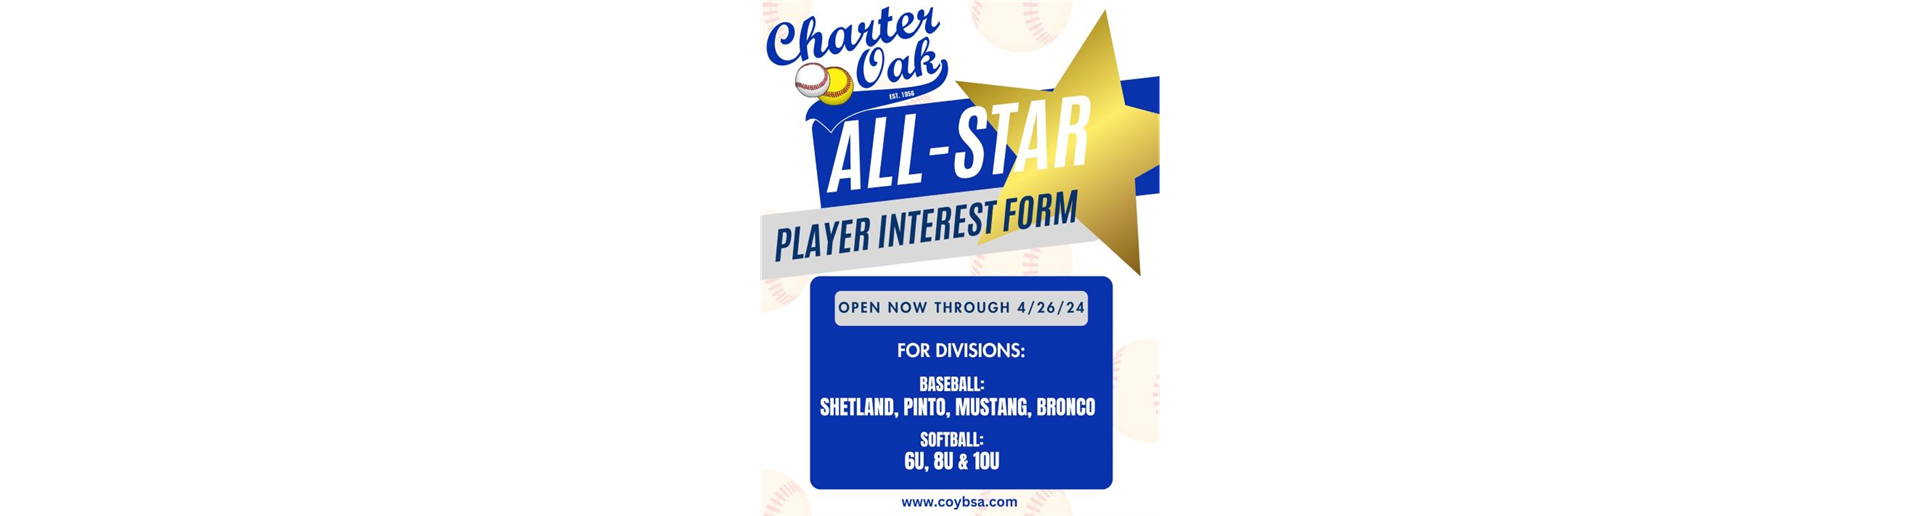 All Star Player Interest Form 